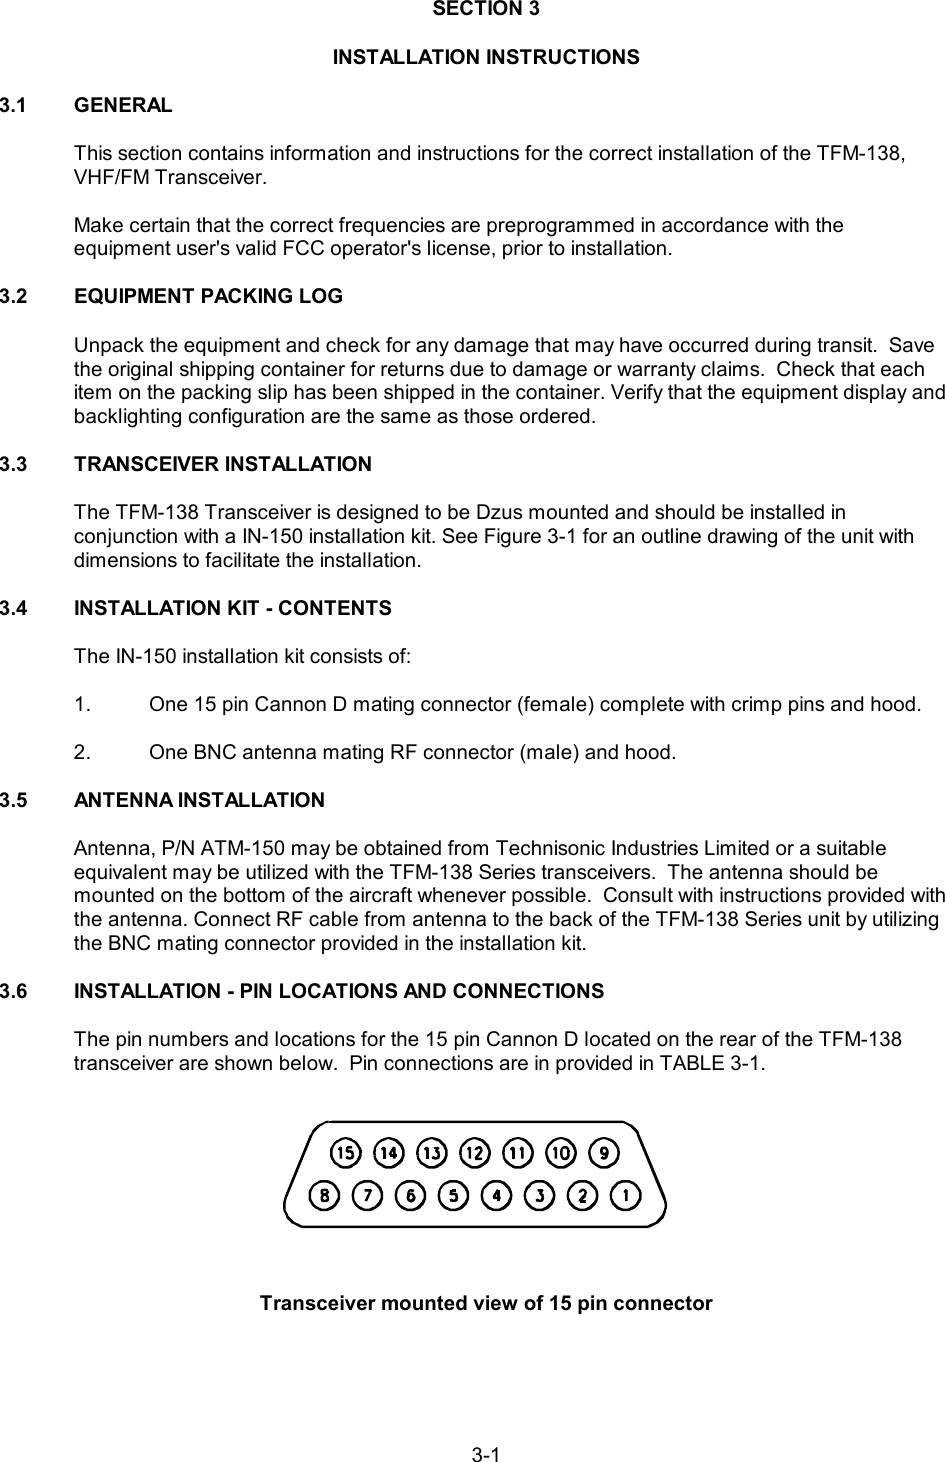 3-1SECTION 3INSTALLATION INSTRUCTIONS3.1 GENERALThis section contains information and instructions for the correct installation of the TFM-138,VHF/FM Transceiver.Make certain that the correct frequencies are preprogrammed in accordance with the equipment user&apos;s valid FCC operator&apos;s license, prior to installation.3.2 EQUIPMENT PACKING LOGUnpack the equipment and check for any damage that may have occurred during transit.  Savethe original shipping container for returns due to damage or warranty claims.  Check that eachitem on the packing slip has been shipped in the container. Verify that the equipment display andbacklighting configuration are the same as those ordered.3.3 TRANSCEIVER INSTALLATION The TFM-138 Transceiver is designed to be Dzus mounted and should be installed in conjunction with a IN-150 installation kit. See Figure 3-1 for an outline drawing of the unit withdimensions to facilitate the installation. 3.4 INSTALLATION KIT - CONTENTSThe IN-150 installation kit consists of: 1. One 15 pin Cannon D mating connector (female) complete with crimp pins and hood.2. One BNC antenna mating RF connector (male) and hood.3.5 ANTENNA INSTALLATION Antenna, P/N ATM-150 may be obtained from Technisonic Industries Limited or a suitable equivalent may be utilized with the TFM-138 Series transceivers.  The antenna should be mounted on the bottom of the aircraft whenever possible.  Consult with instructions provided withthe antenna. Connect RF cable from antenna to the back of the TFM-138 Series unit by utilizingthe BNC mating connector provided in the installation kit.3.6 INSTALLATION - PIN LOCATIONS AND CONNECTIONSThe pin numbers and locations for the 15 pin Cannon D located on the rear of the TFM-138 transceiver are shown below.  Pin connections are in provided in TABLE 3-1.Transceiver mounted view of 15 pin connector